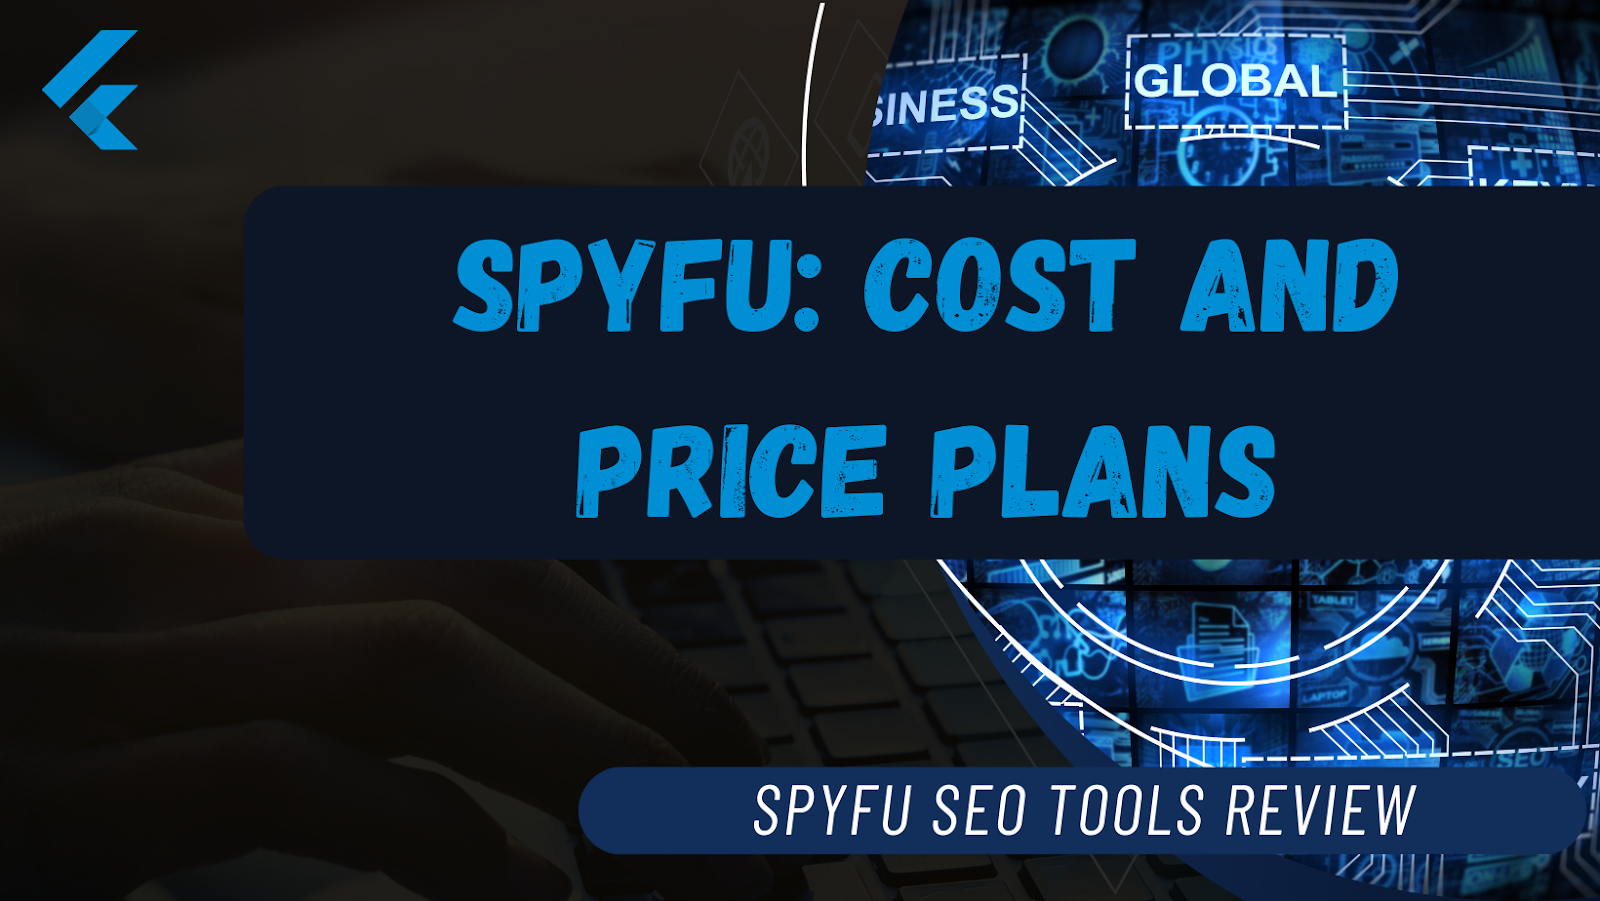 Spyfu: Cost And Price Plans